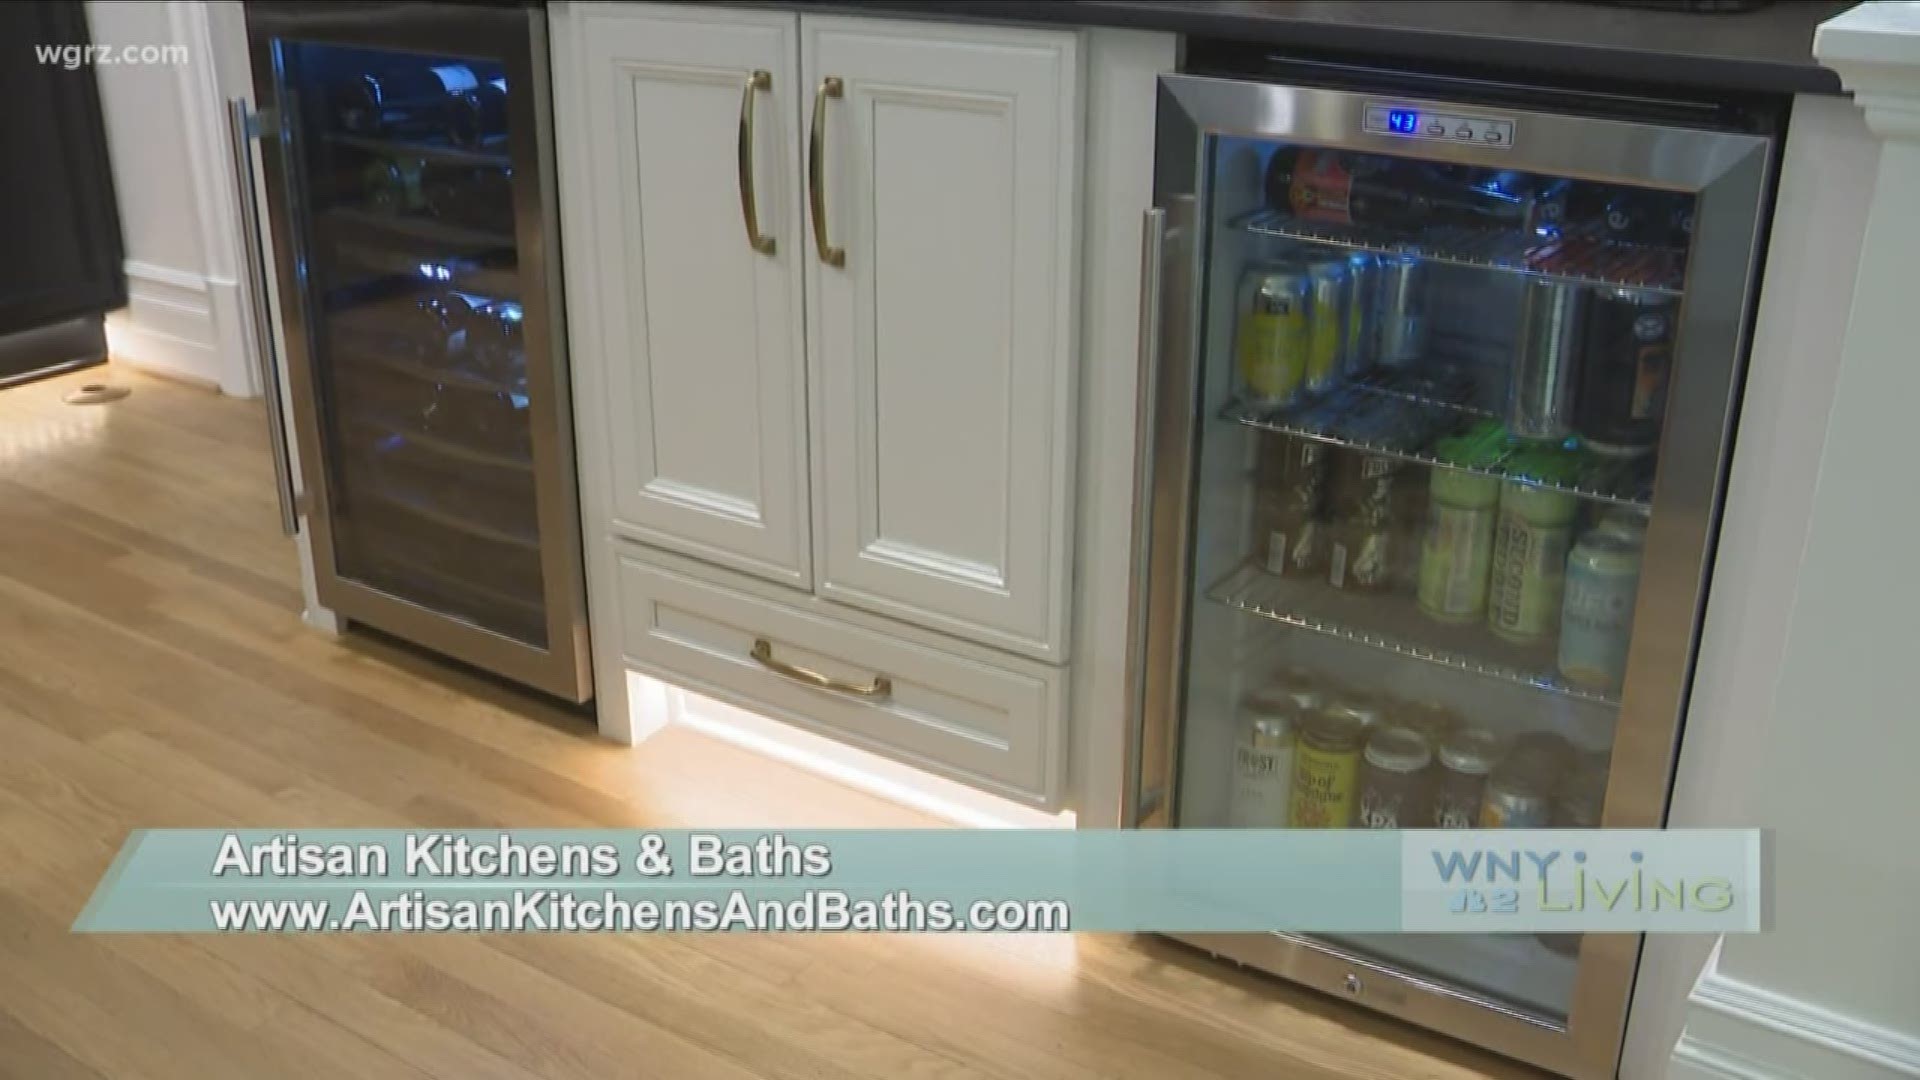 March 14 - Artisan Kitchens and Baths (THIS VIDEO IS SPONSORED BY ARTISAN KITCHENS AND BATHS)